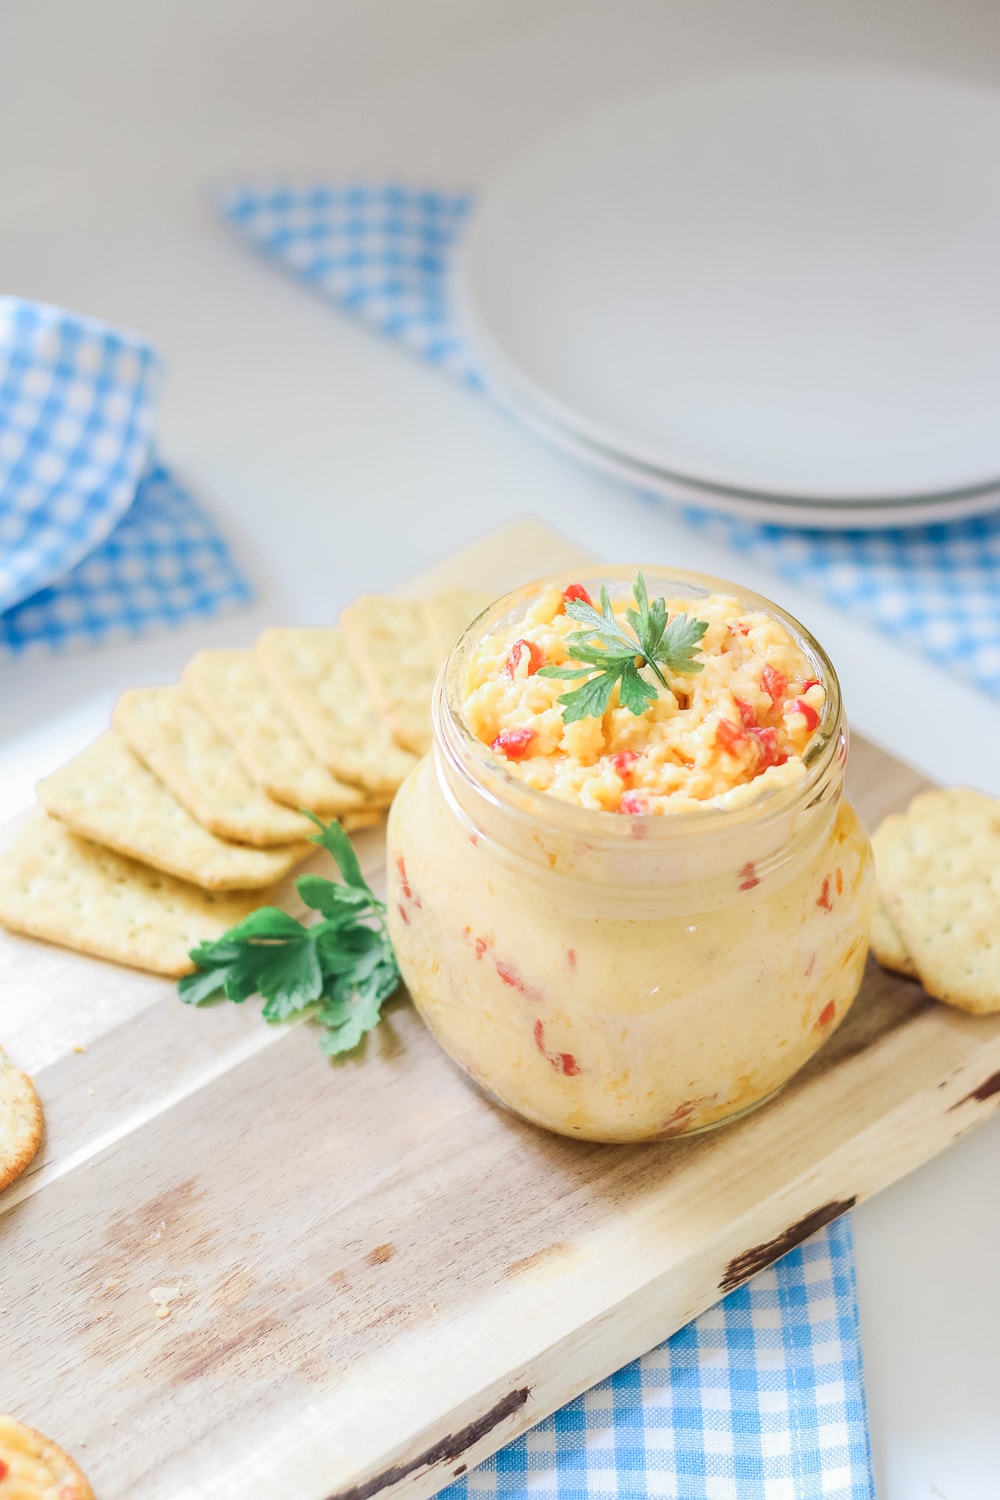 Baked pimento cheese dip recipe adapted from Southern Living by southern lifestyle blogger Stephanie Ziajka on Diary of a Debutante